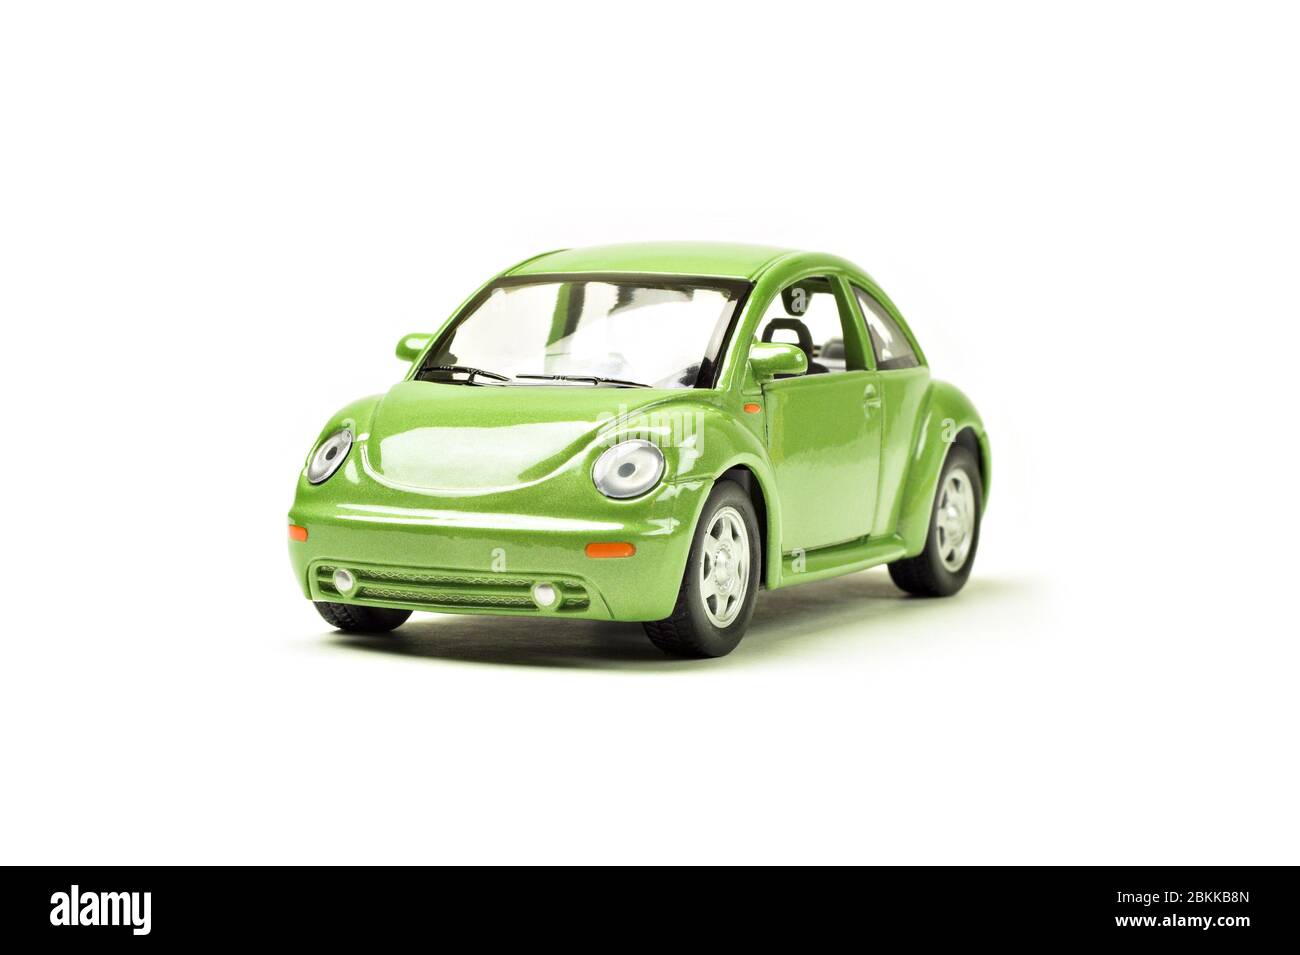 Unbranded Toy Volkswagen Beetle car on a white background Stock Photo